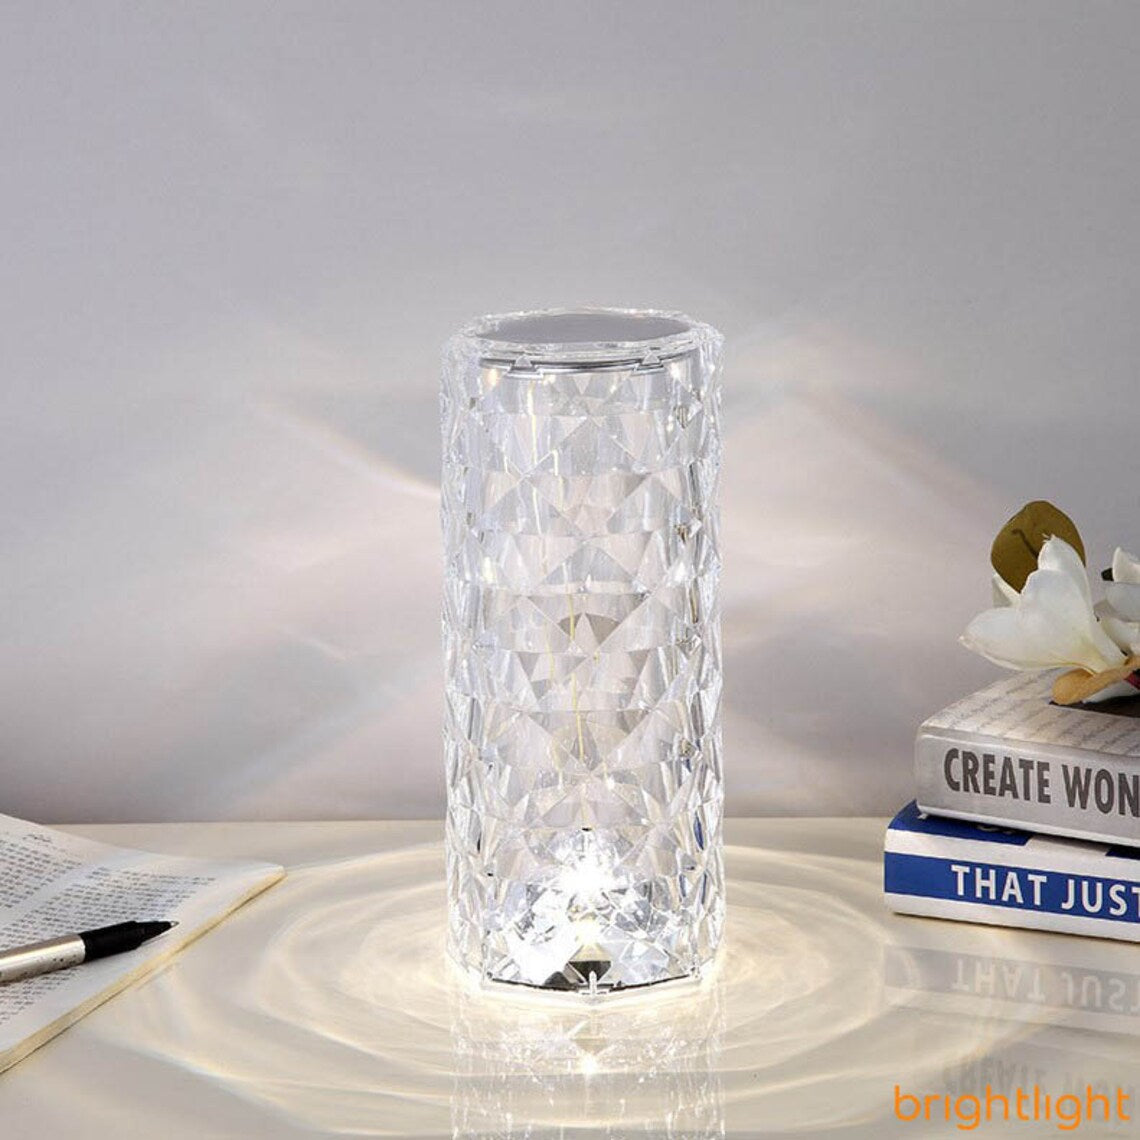 Crystal Lamps Table - Buy Crystal Lamps Table in dubai - hocc dubai - - baby playground outdoor- Shop baby product - Shop Pet product - shop home decor and lighting